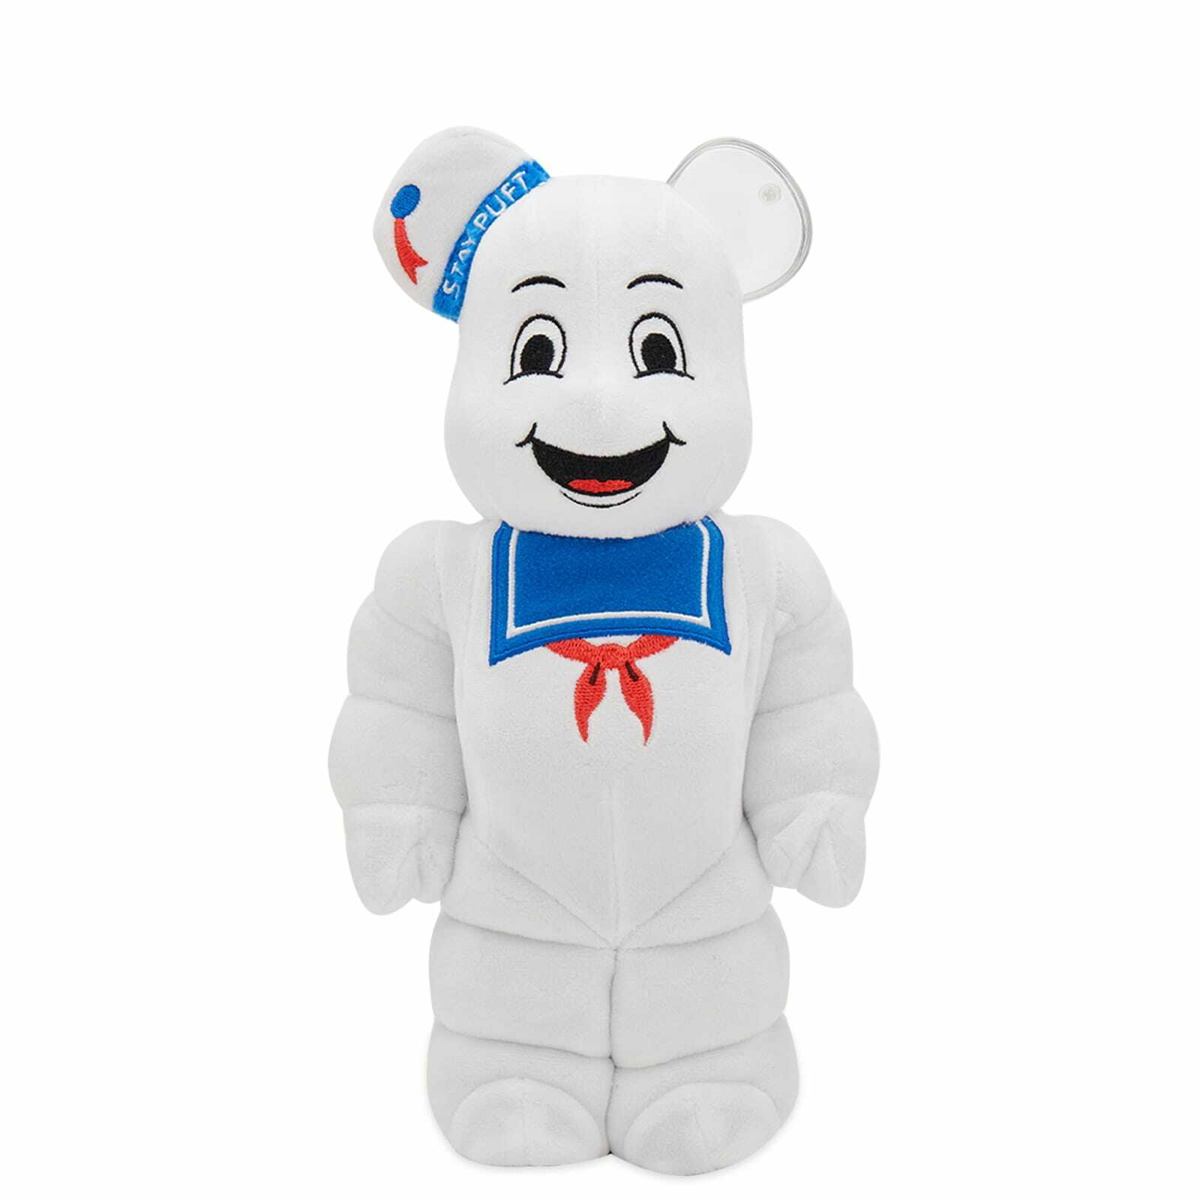 Medicom STAY PUFT MARSHMALLOW MAN COSTUME Be@rbrick in White 400